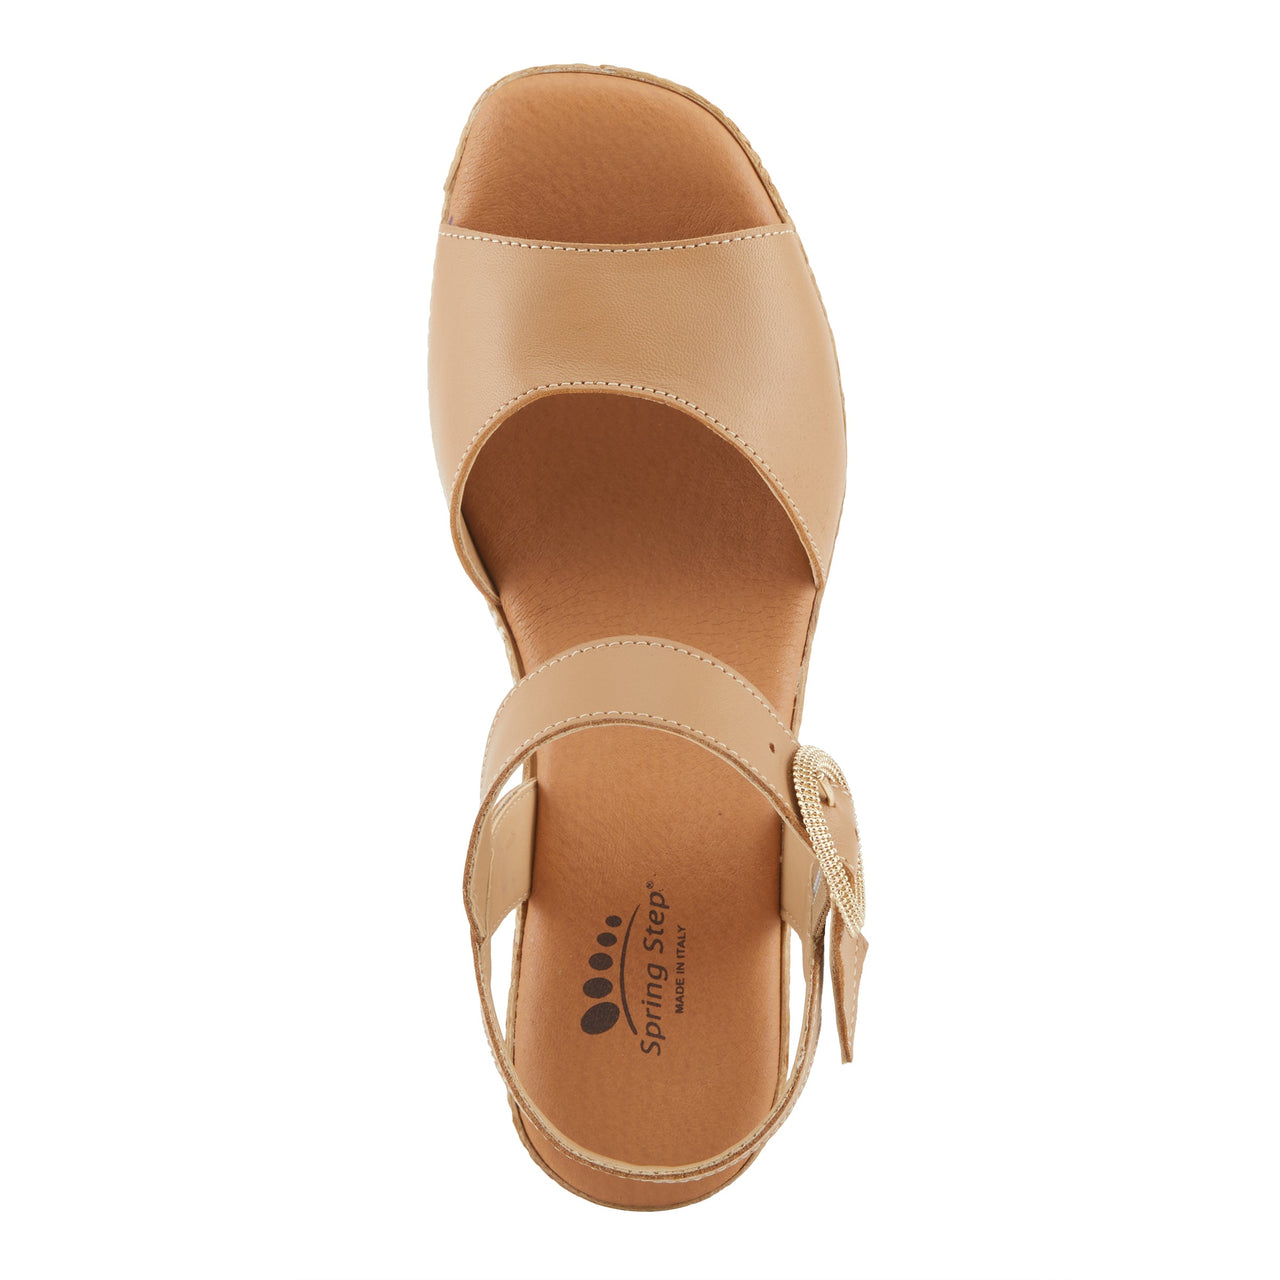 Chic and stylish Spring Step Isola sandals with adjustable straps and cushioned footbed for all-day comfort and support